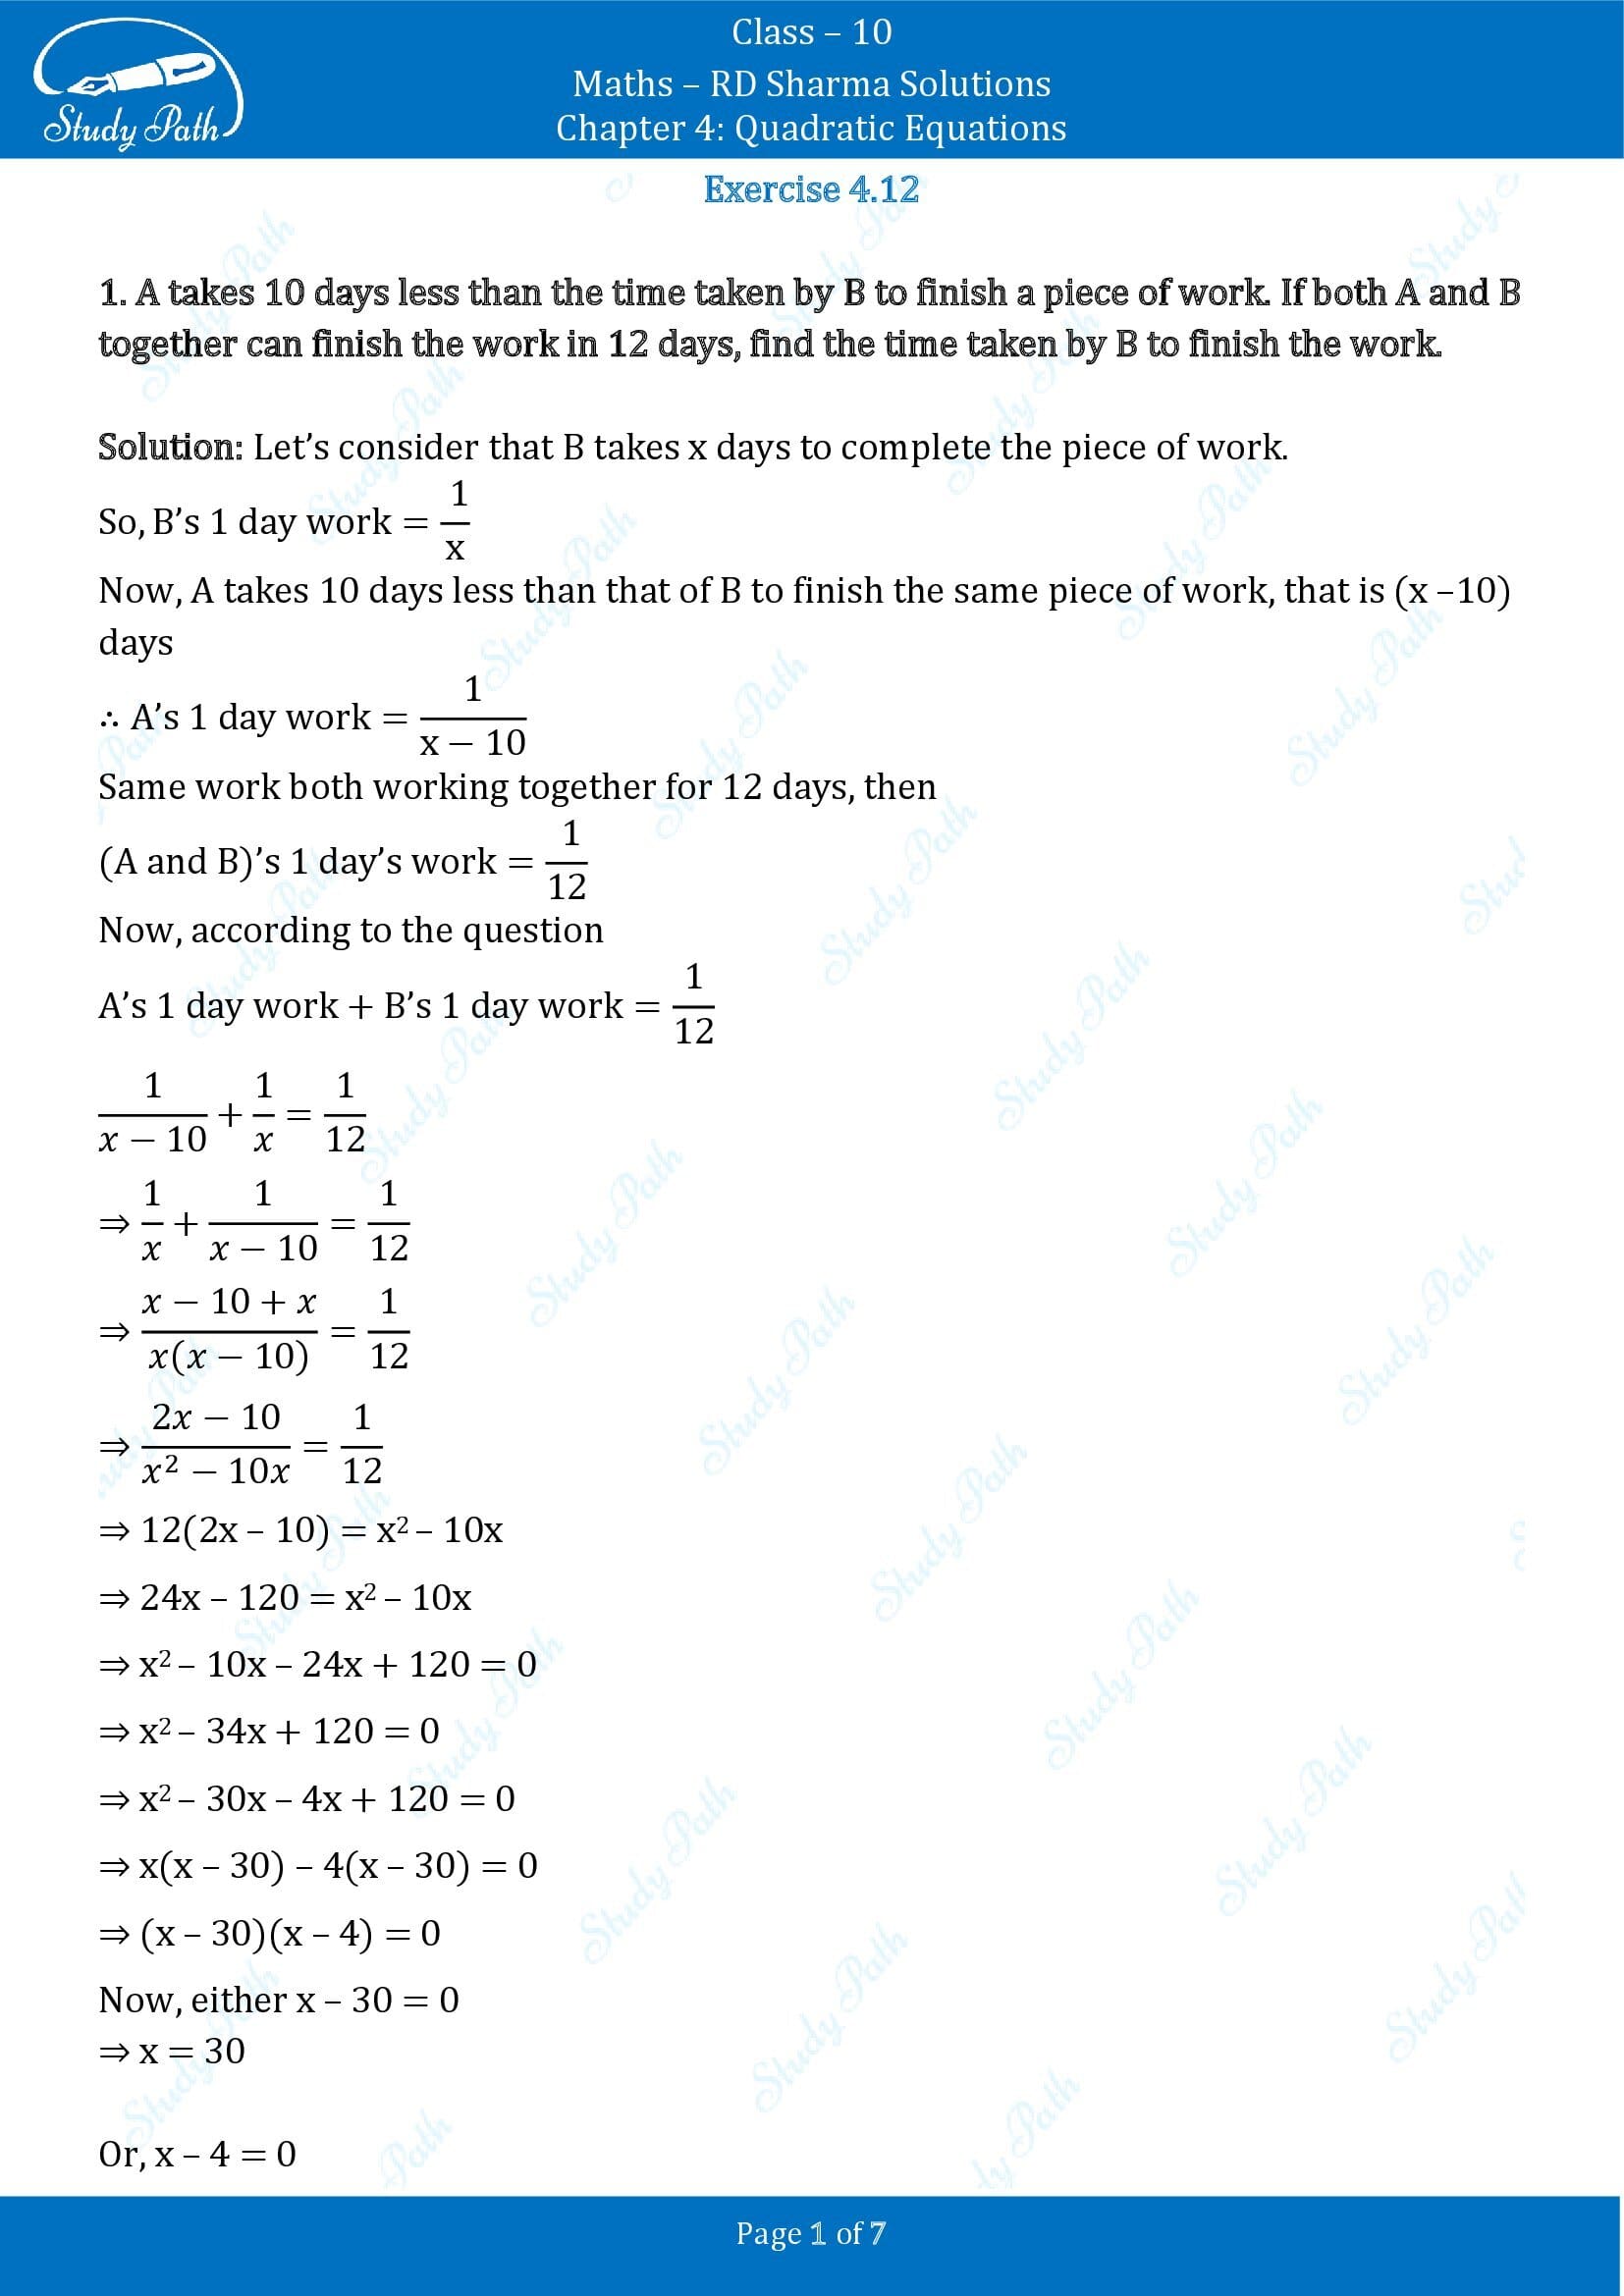 RD Sharma Solutions Class 10 Chapter 4 Quadratic Equations Exercise 4.12 00001